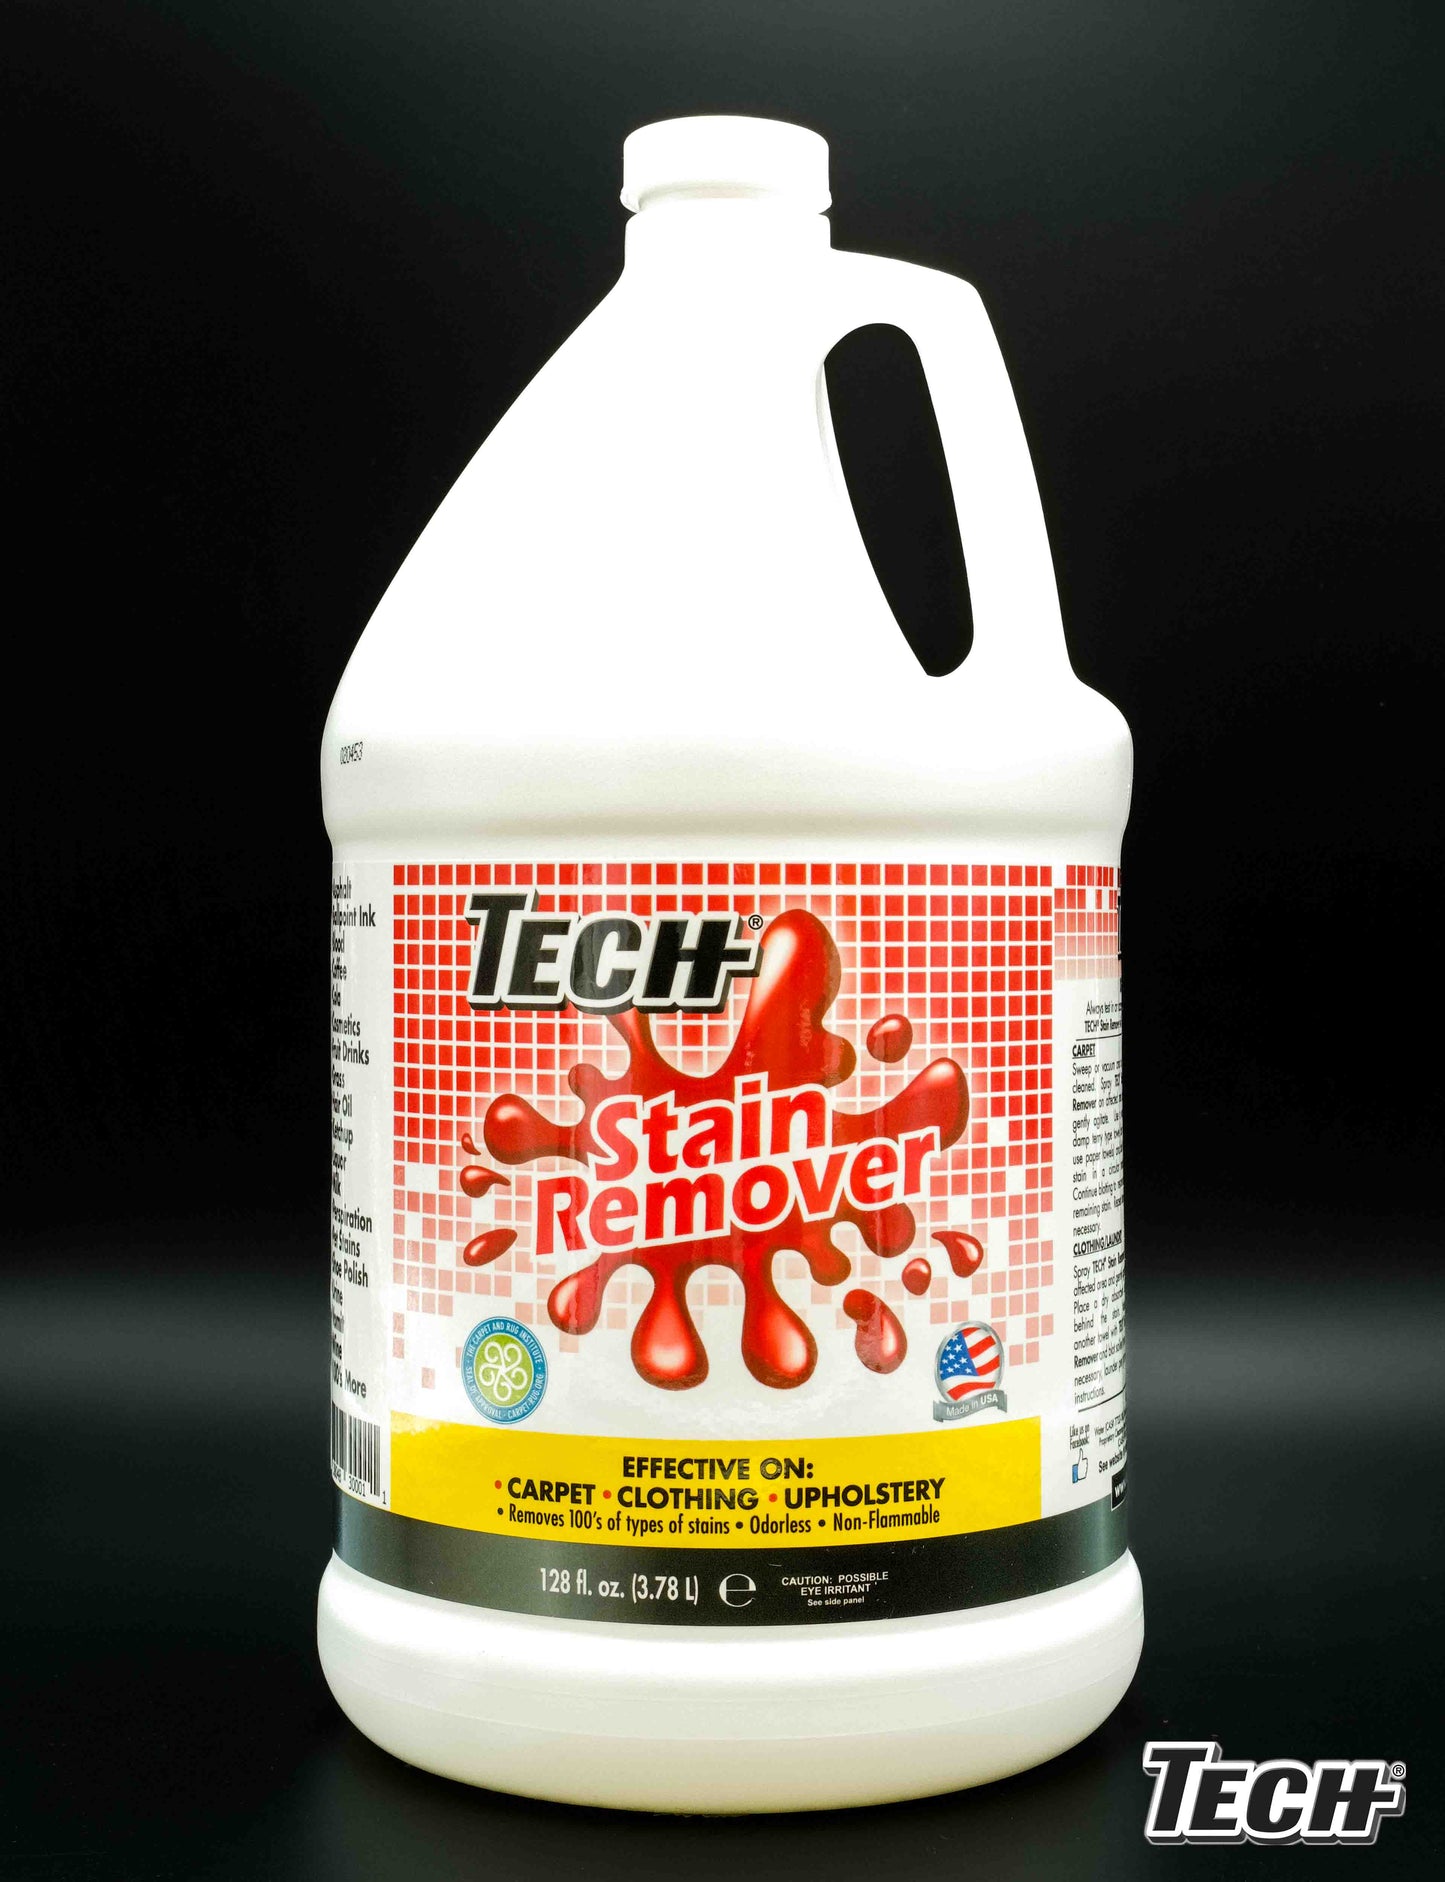 TECH Stain Remover 128 oz Bottle - Effective Stain Remover for Carpet, Clothing, Laundry, Upholstery and Other Washable Fabrics